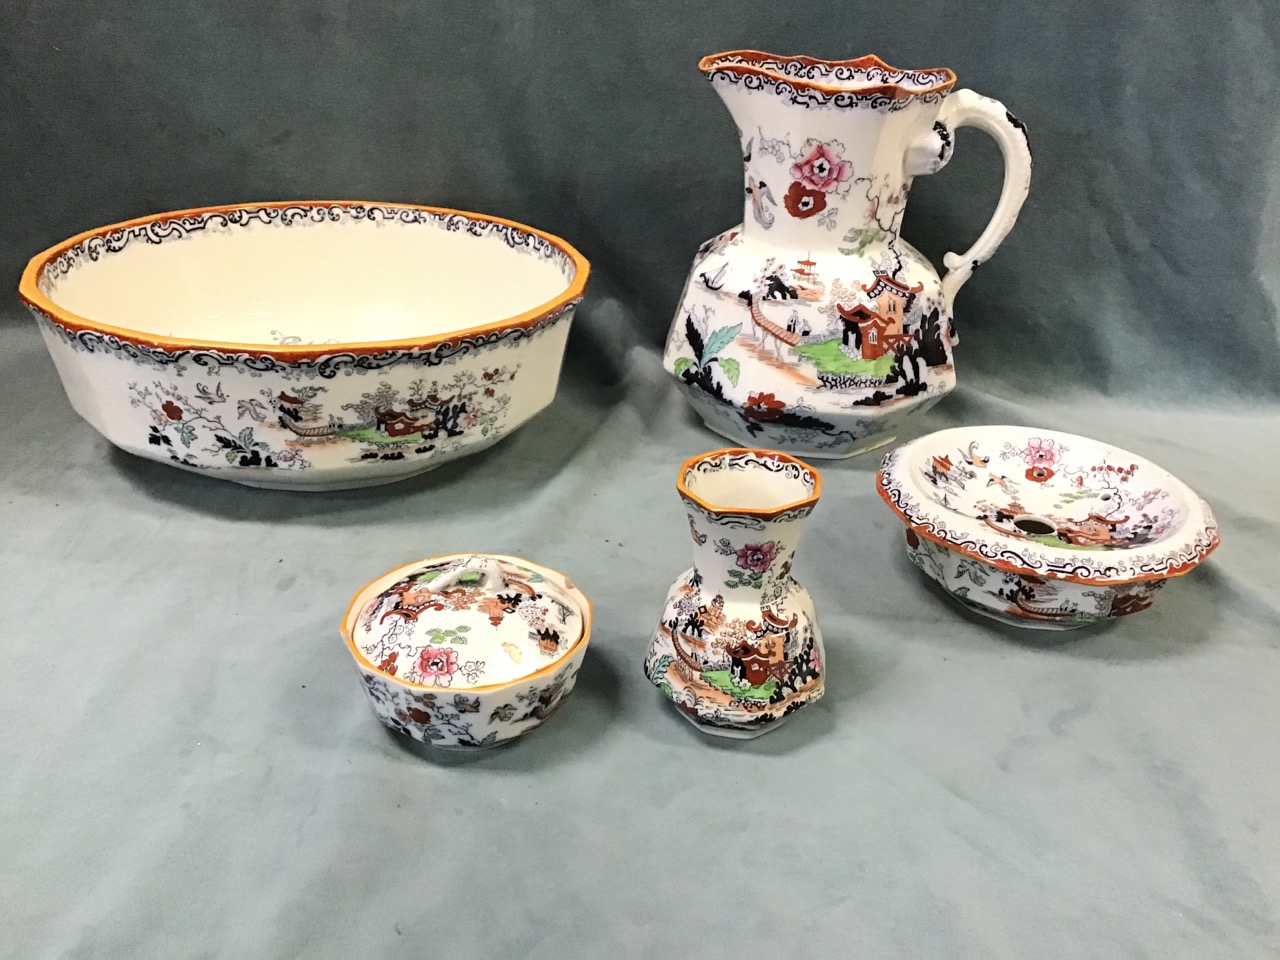 A Victorian Masons ironstone toilet set in a chinoiserie pattern comprising a basin & ewer with